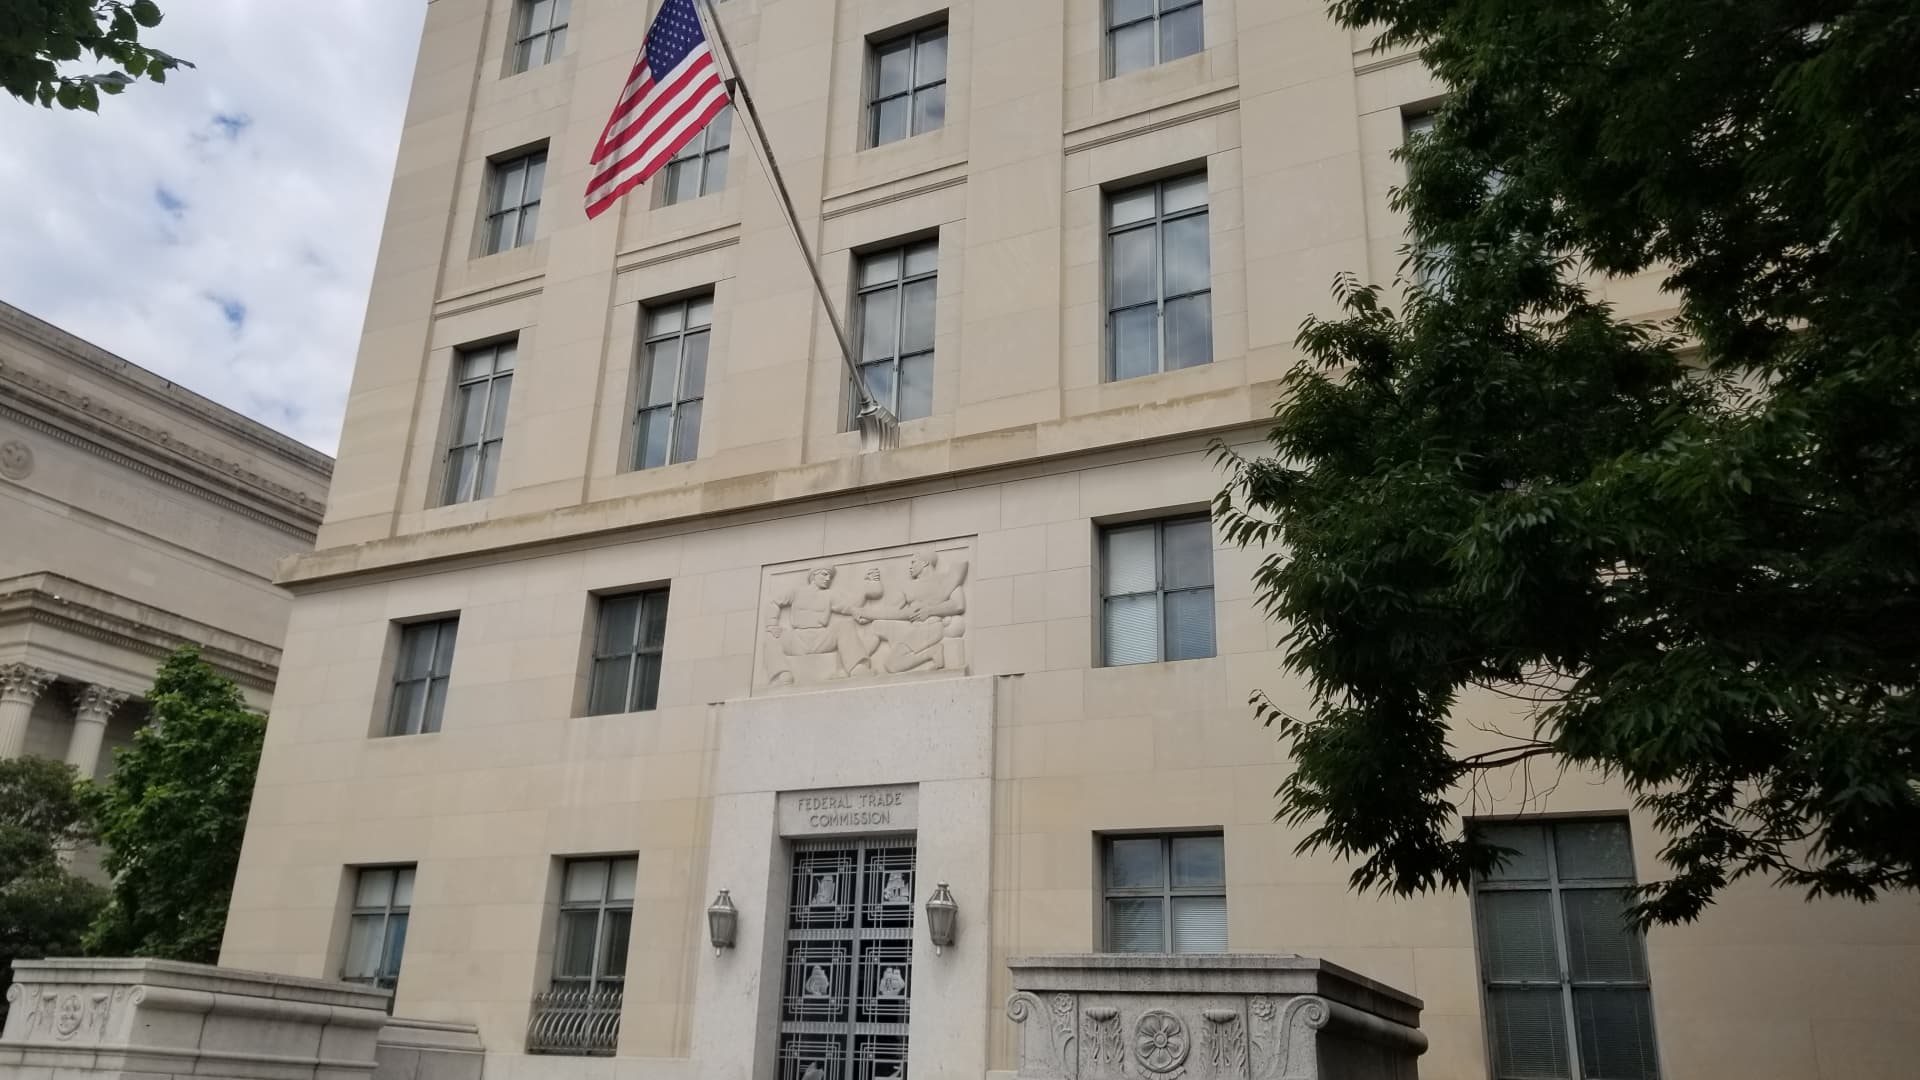 Headquarters of the Federal Trade Commission in Washington, D.C.